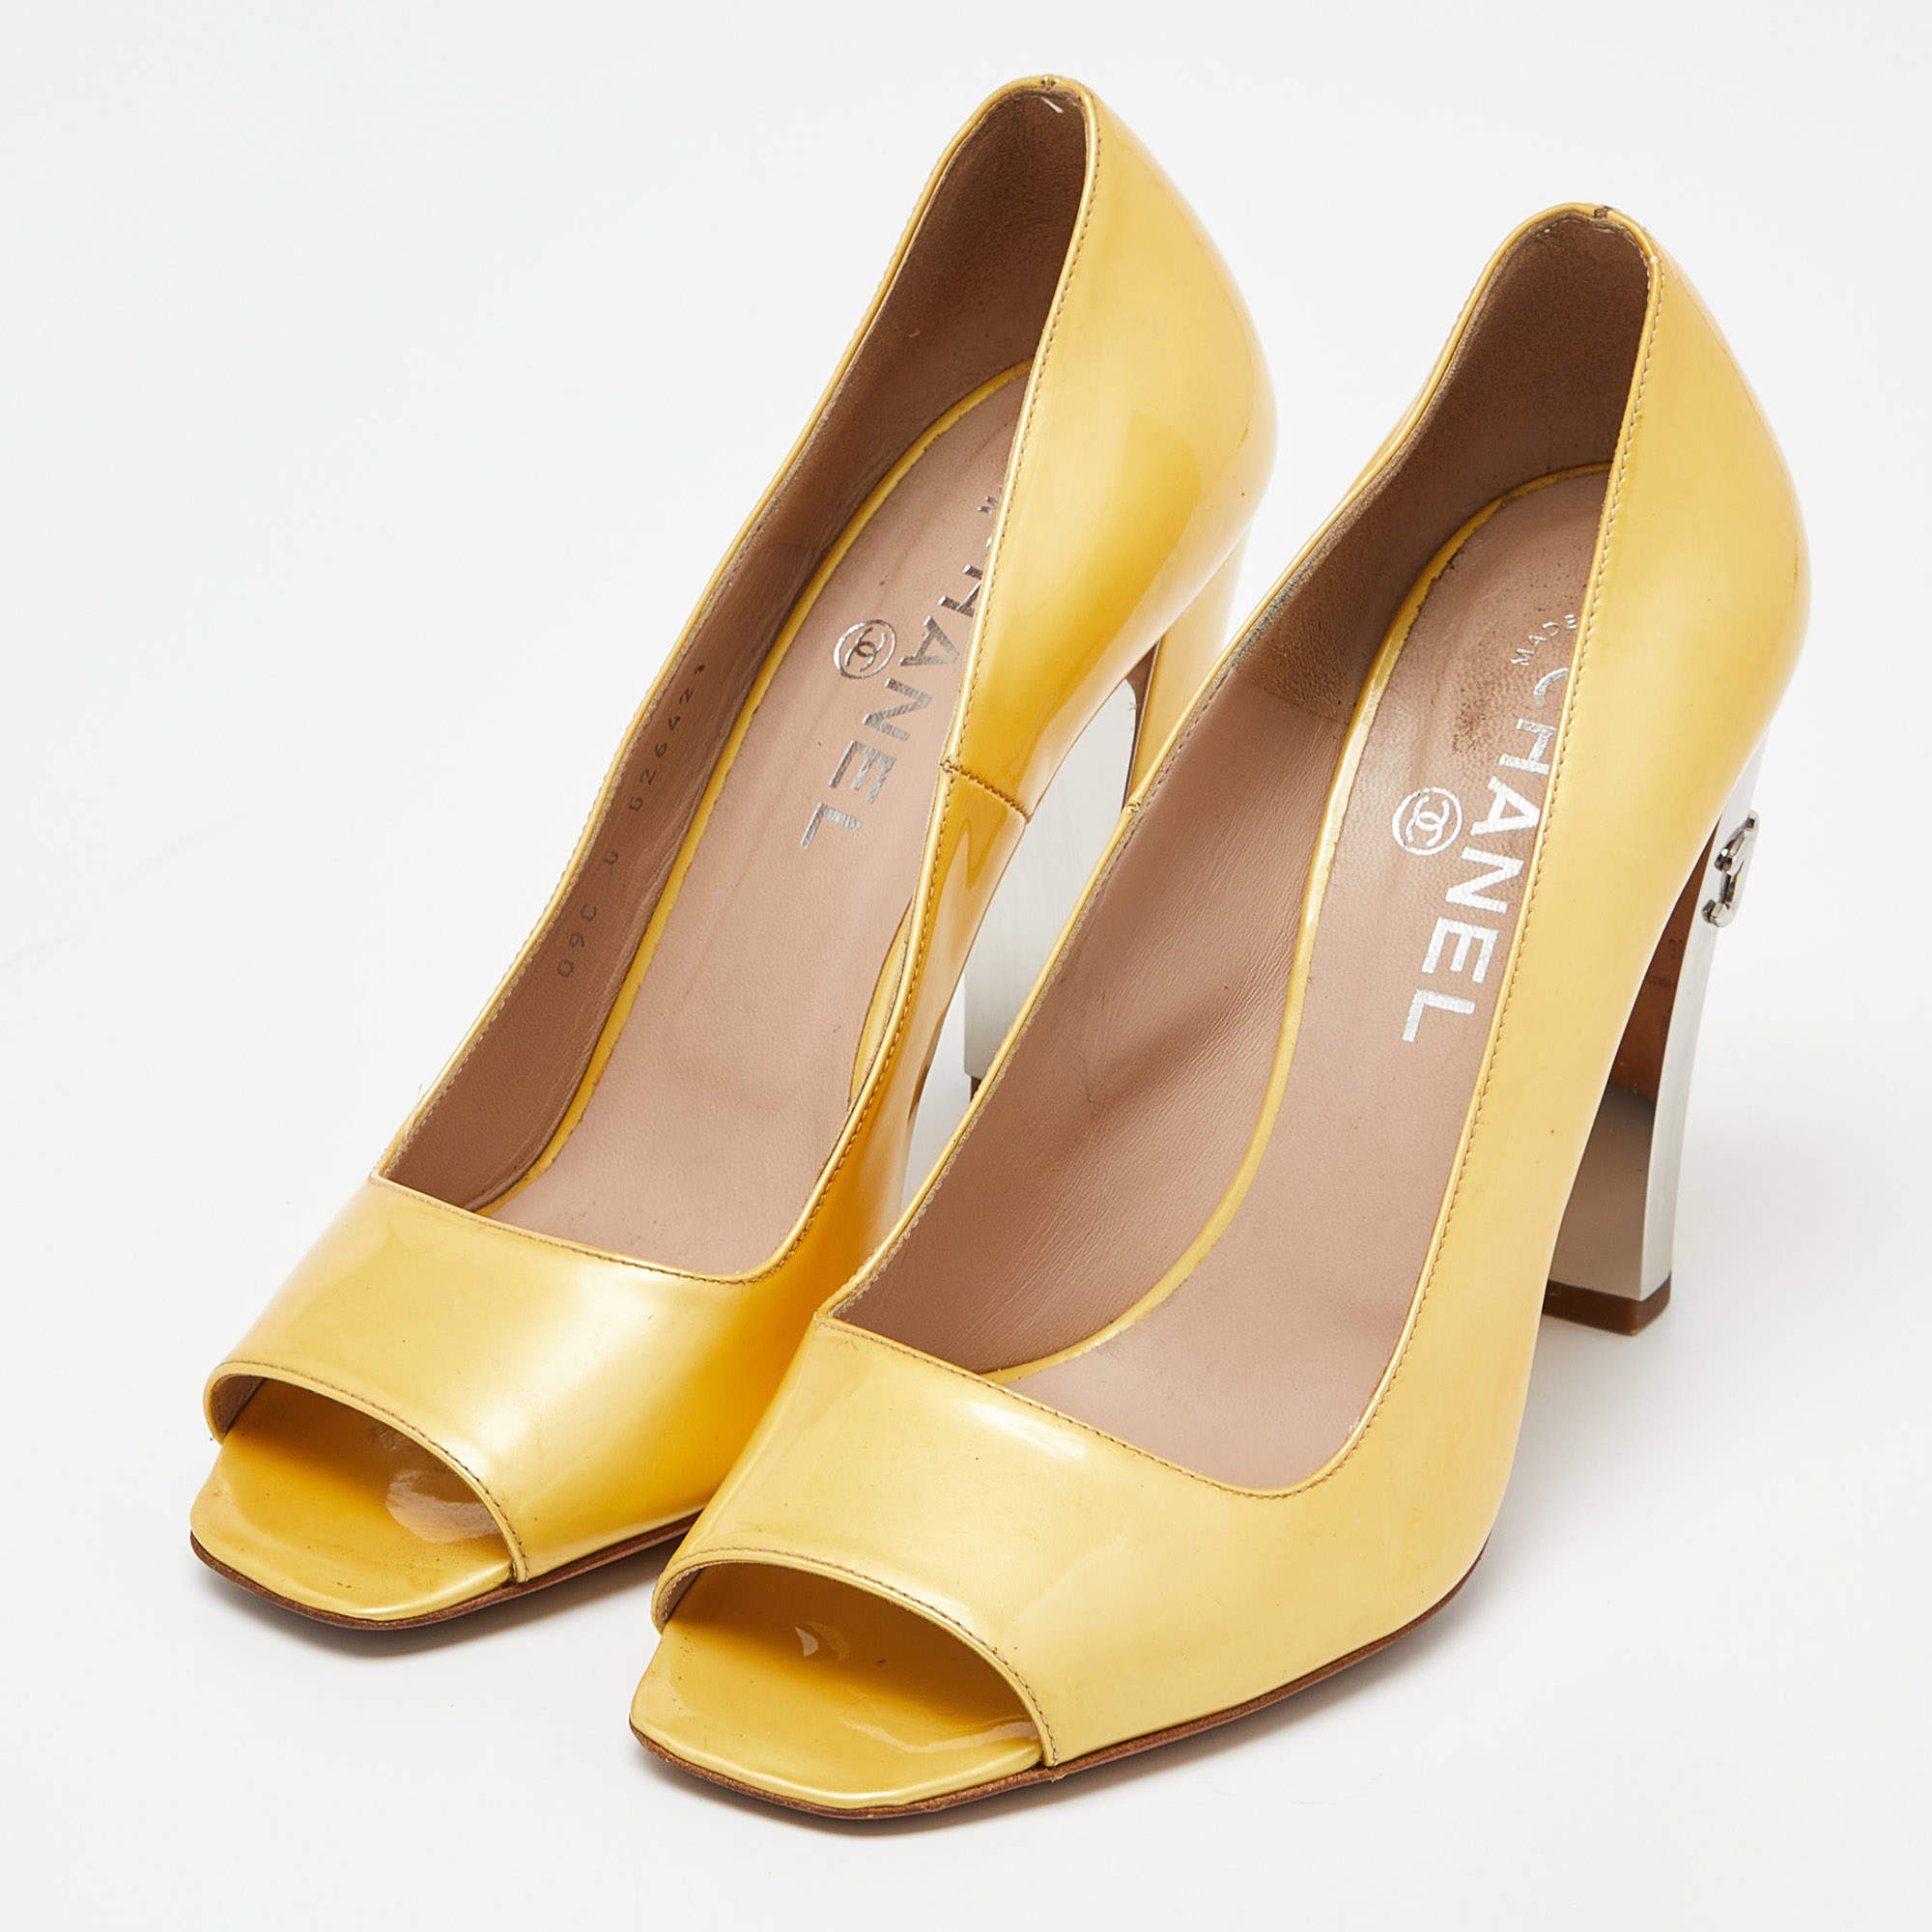 Chanel Yellow Patent Leather CC Open Toe Pumps Size 38 Chanel